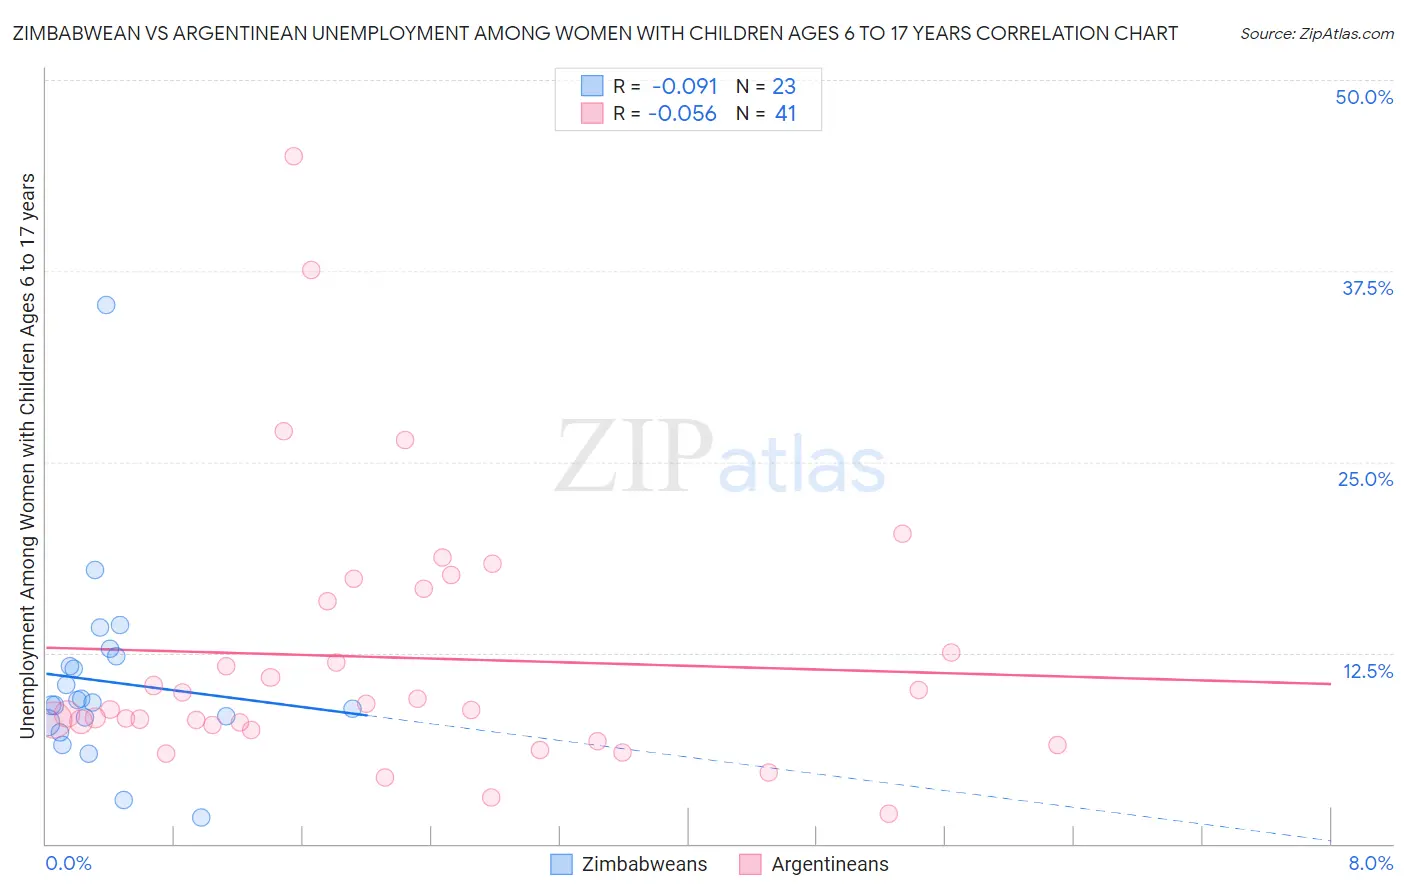 Zimbabwean vs Argentinean Unemployment Among Women with Children Ages 6 to 17 years